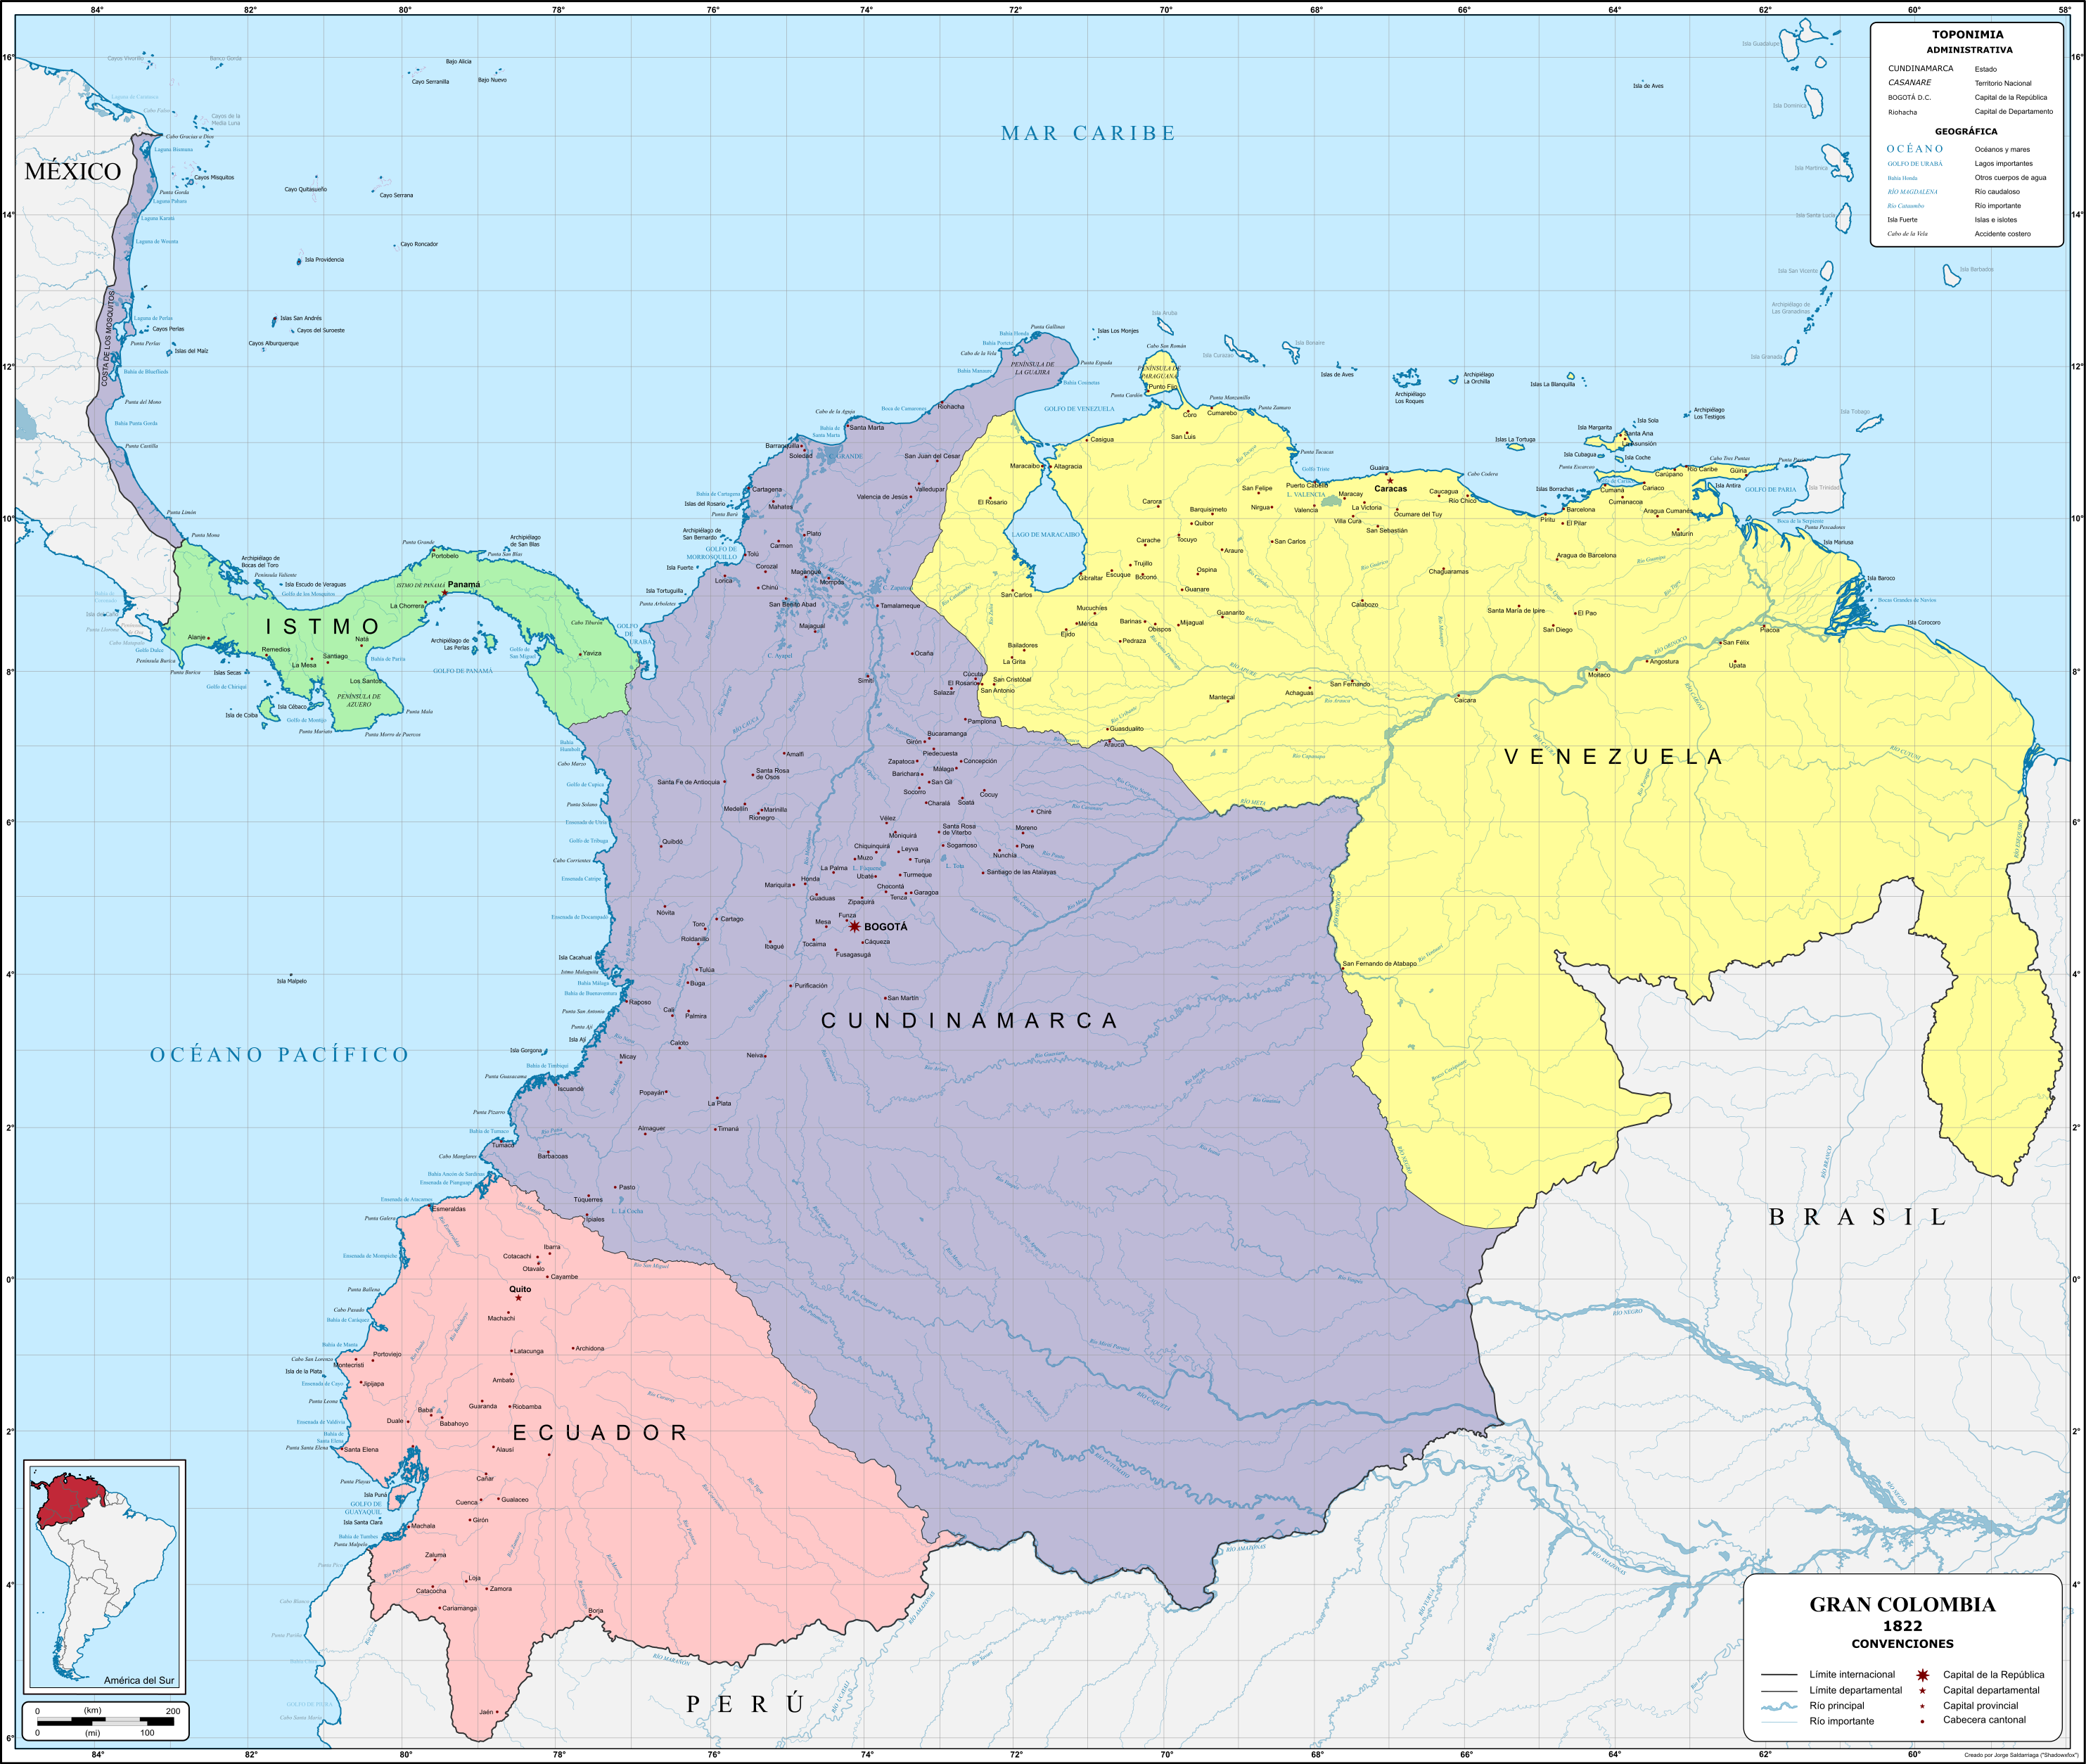 Spanish-language map showing historical boundaries of Gran Colombia, with subnational borders around present-day Venezuela, Colombia (labeled Cundinamarca), Ecuador, and the Isthmus of Panama